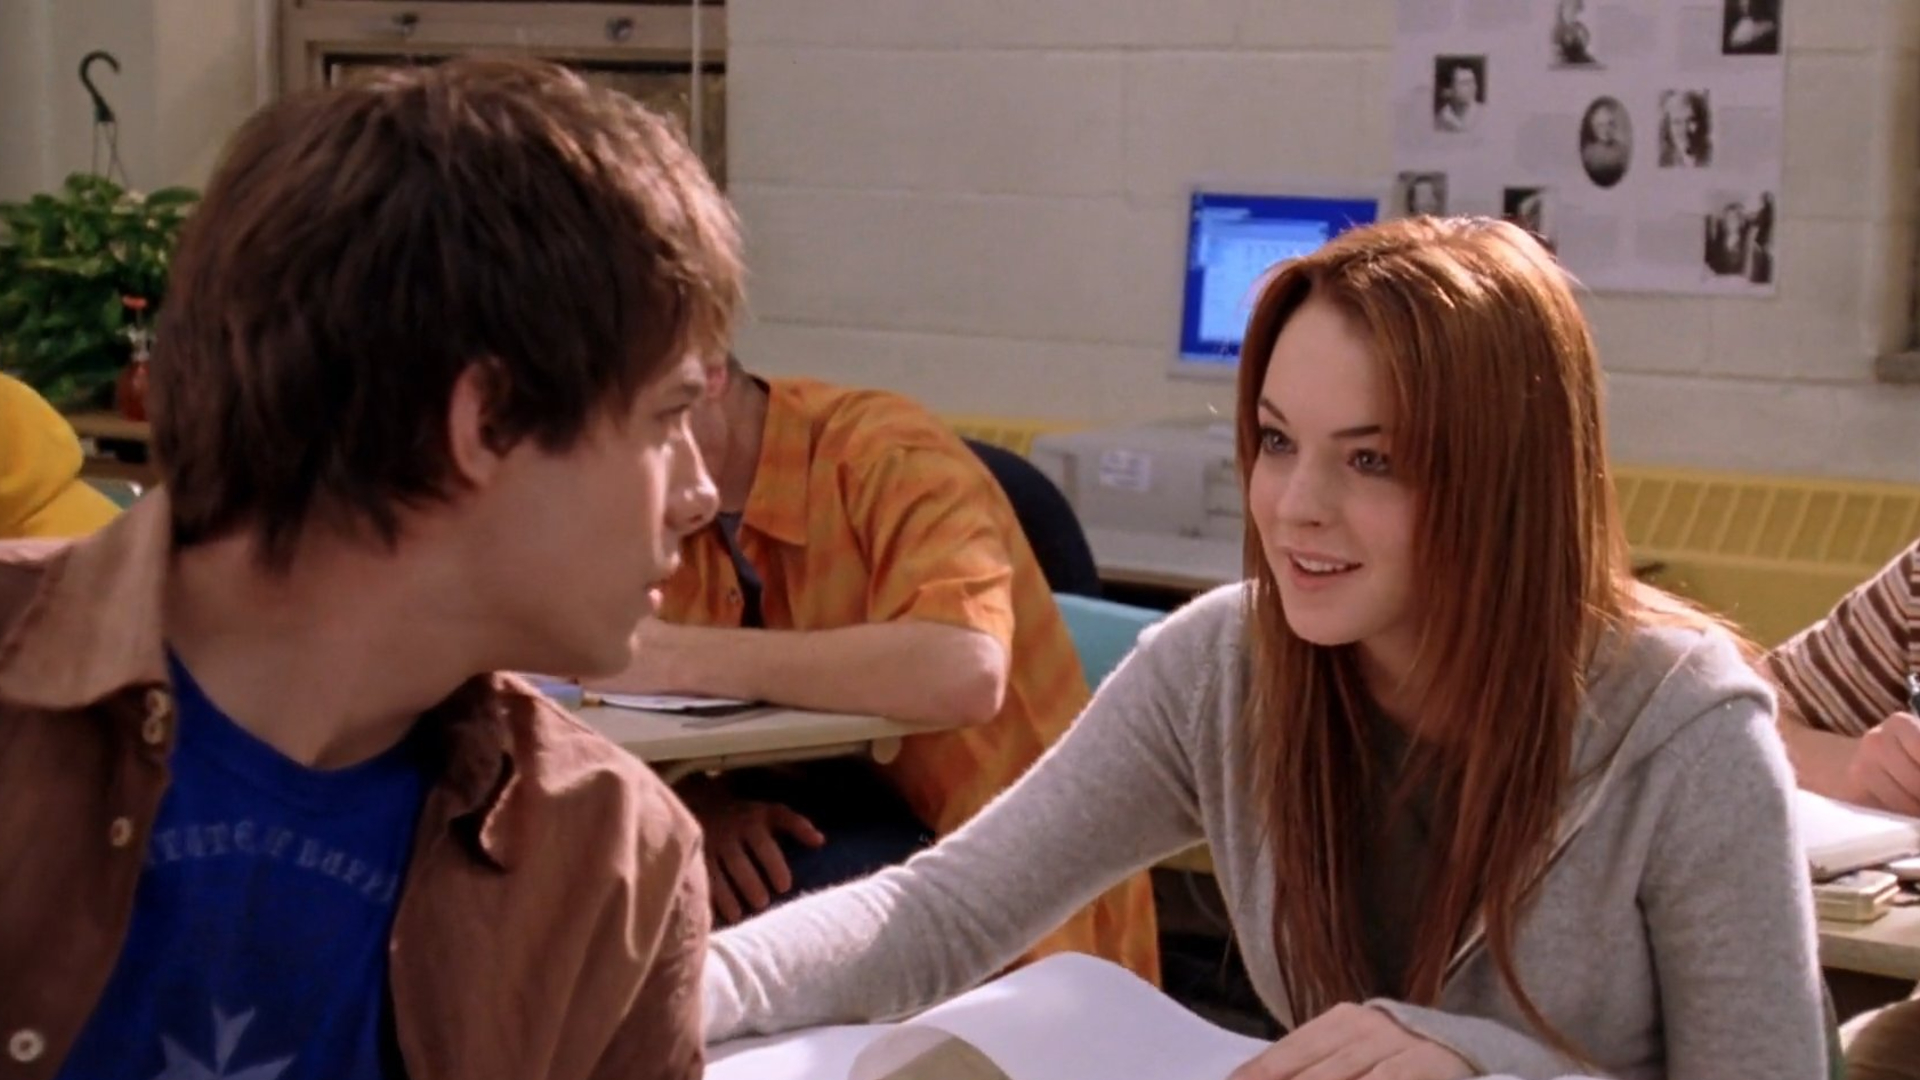 Aaron Samuels asked Cady Heron what day it was on October 3 (Photo: Twitter.com/sherlockify)